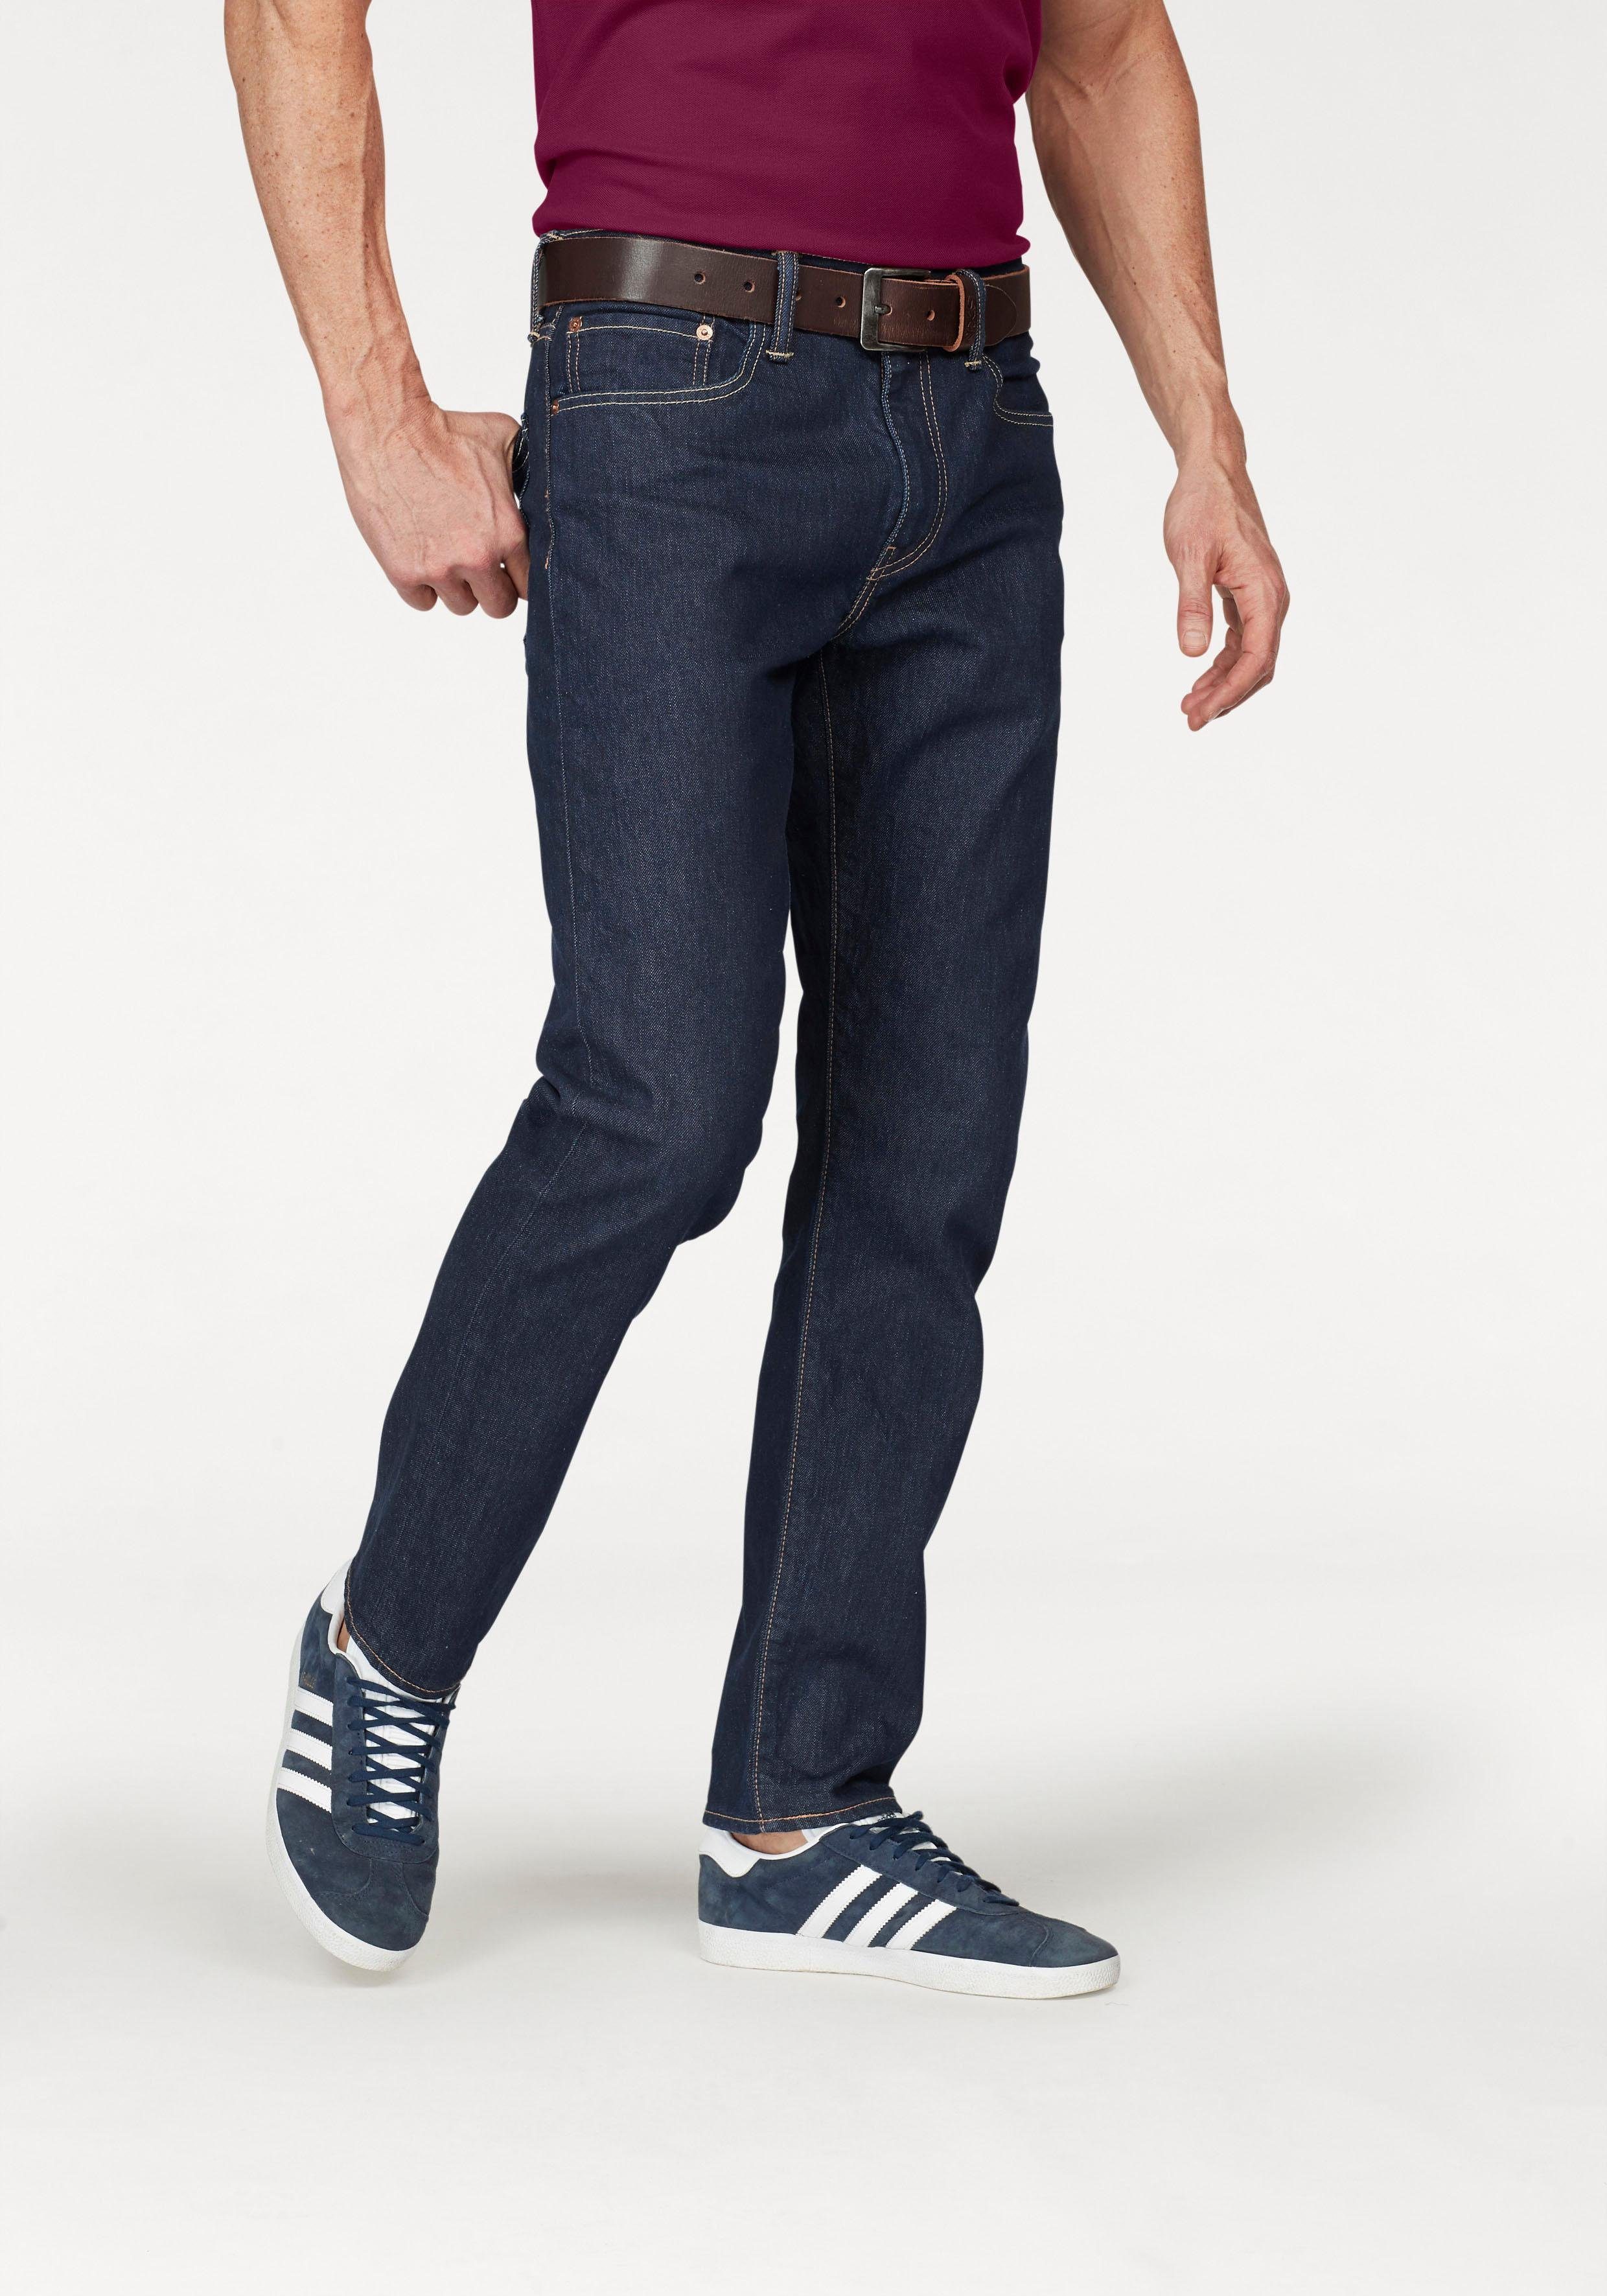 Otto - Levi's NU 15% KORTING: LEVI'S® stretchjeans 502™